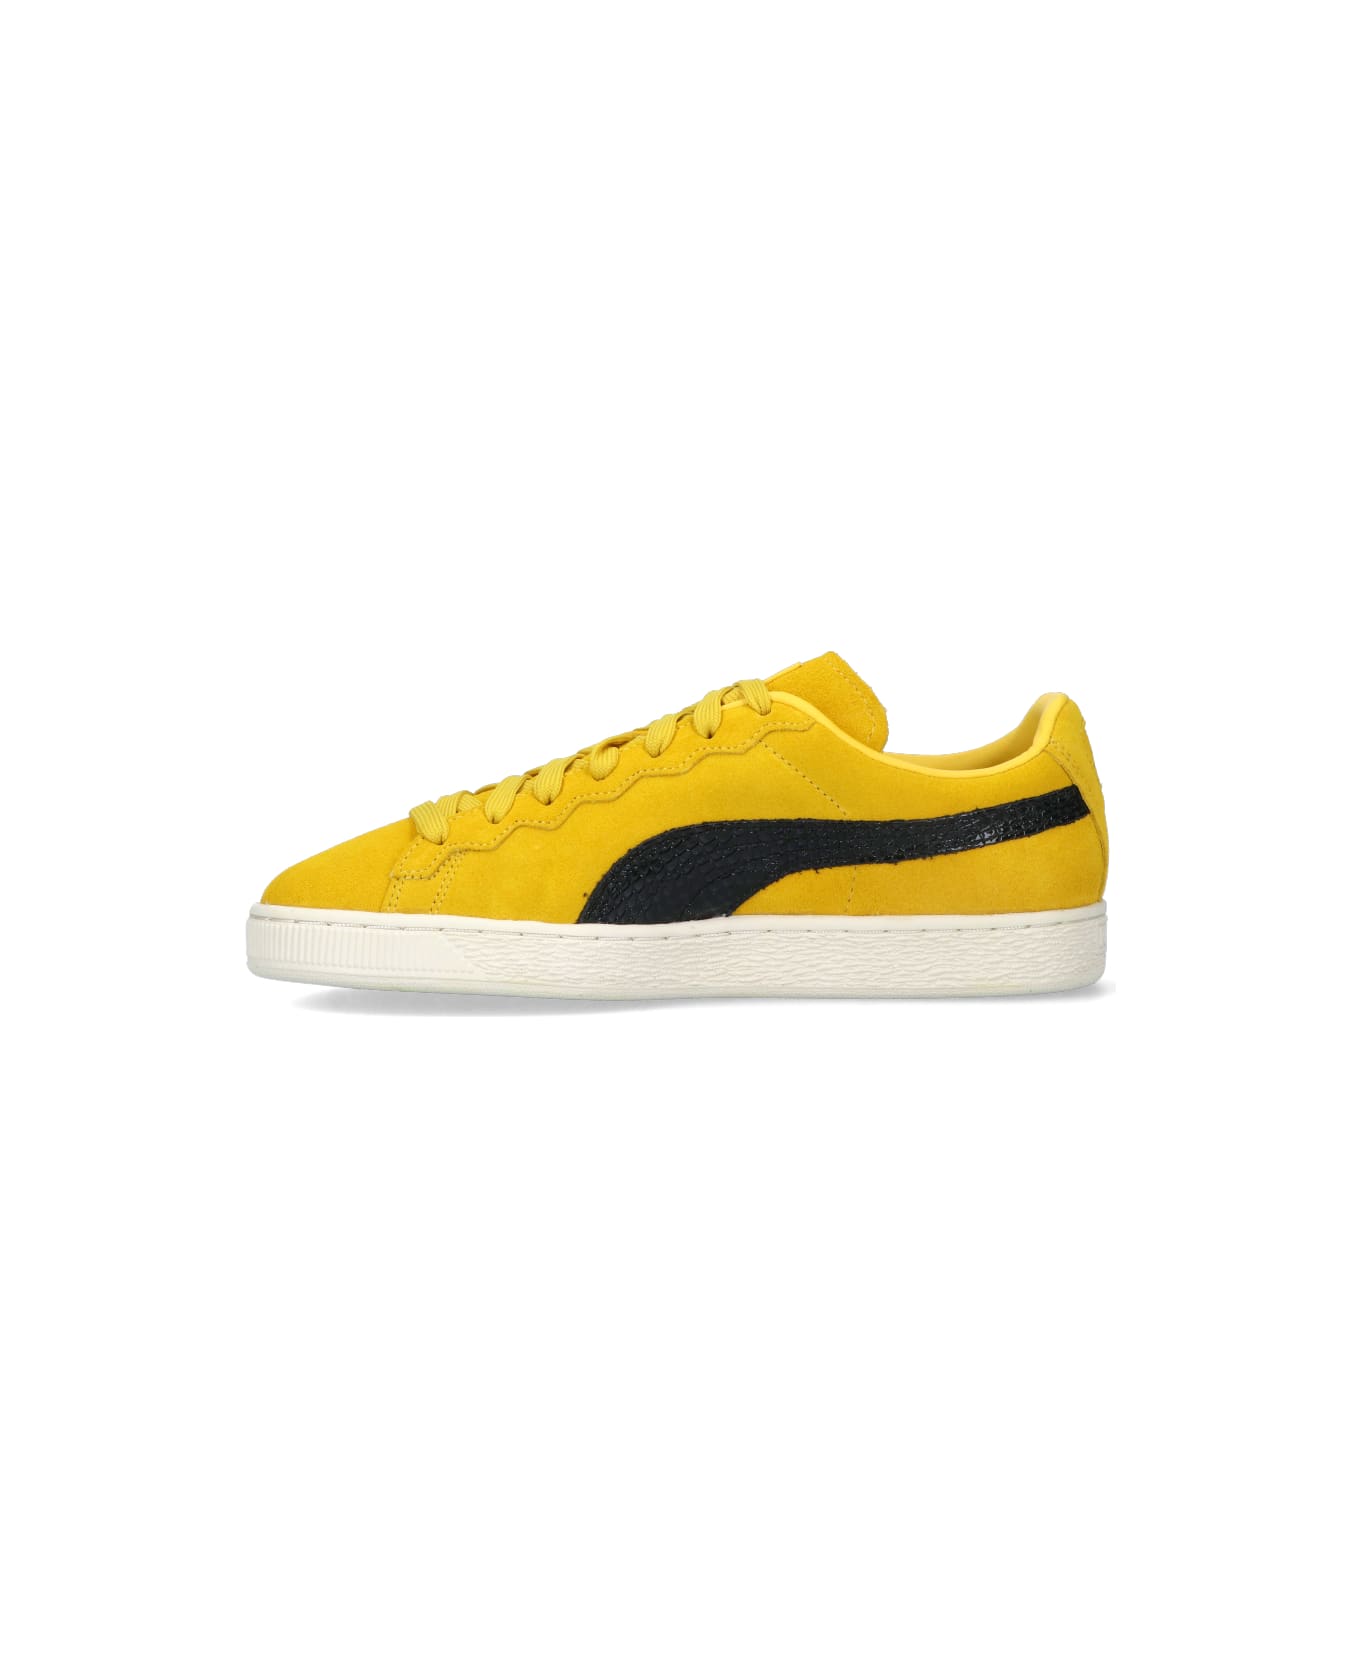 Puma X Staple Suede Low Sneakers - Yellow